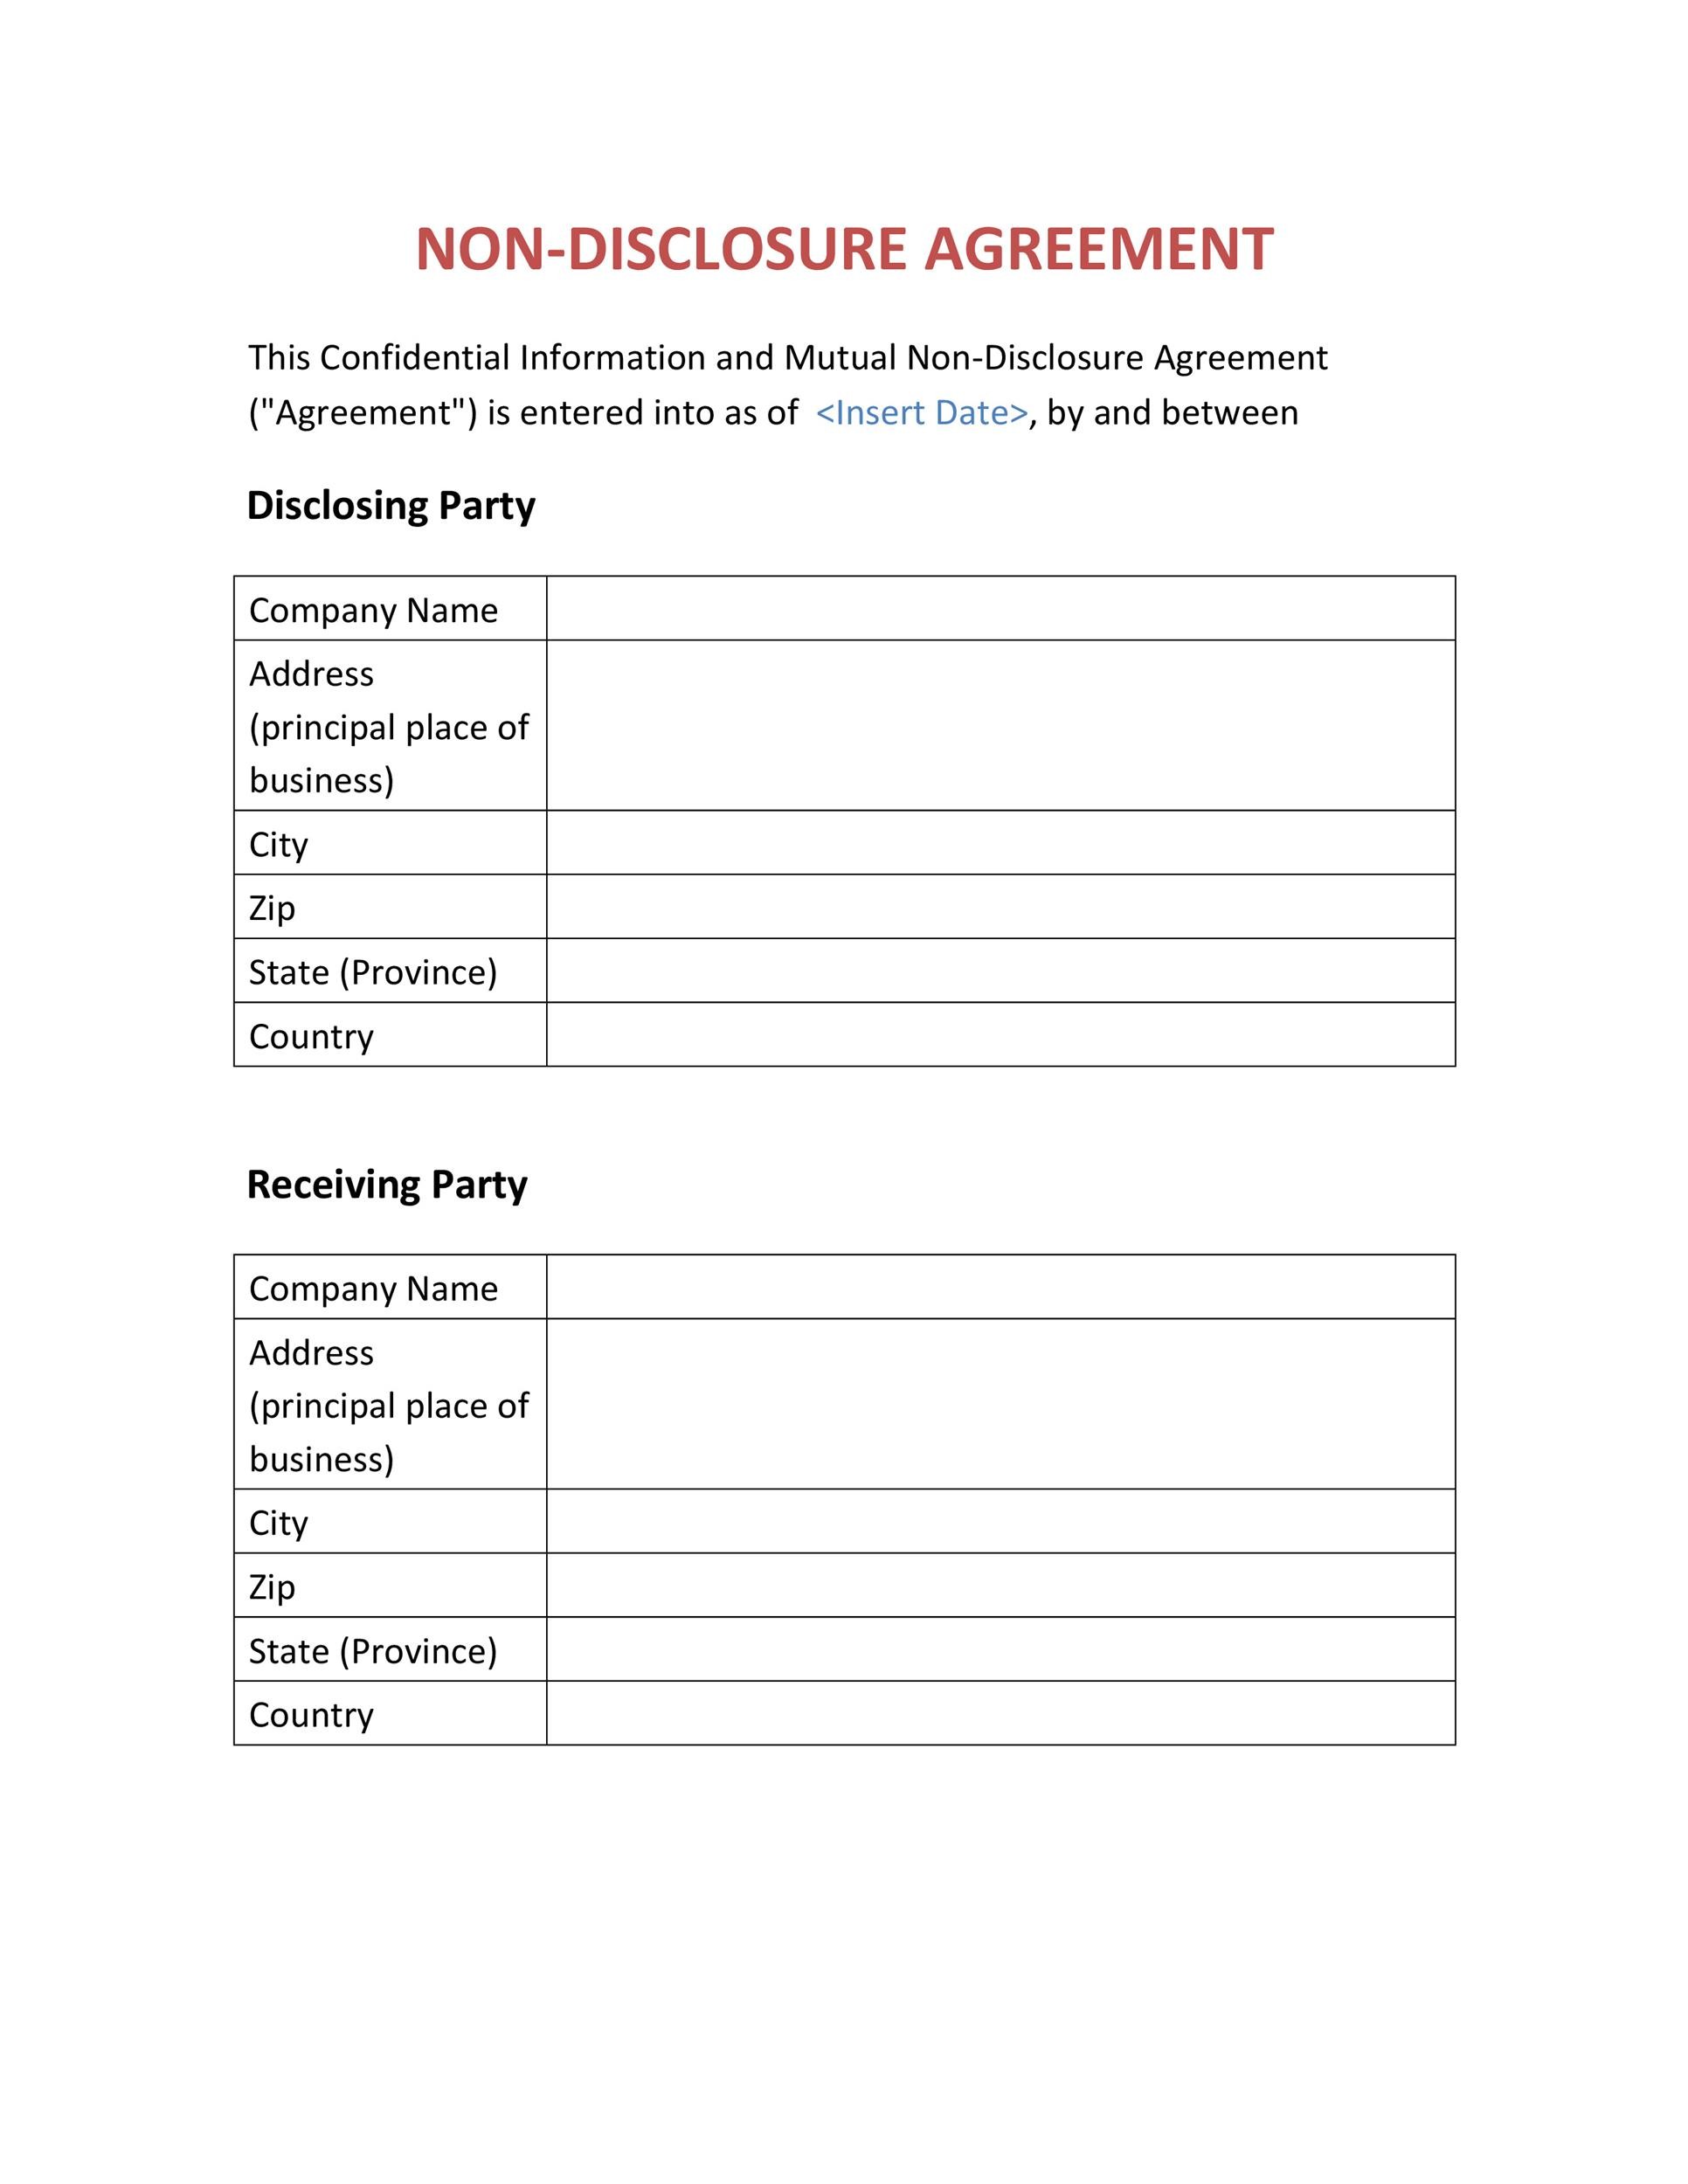 40 Non Disclosure Agreement Templates, Samples & Forms ᐅ TemplateLab